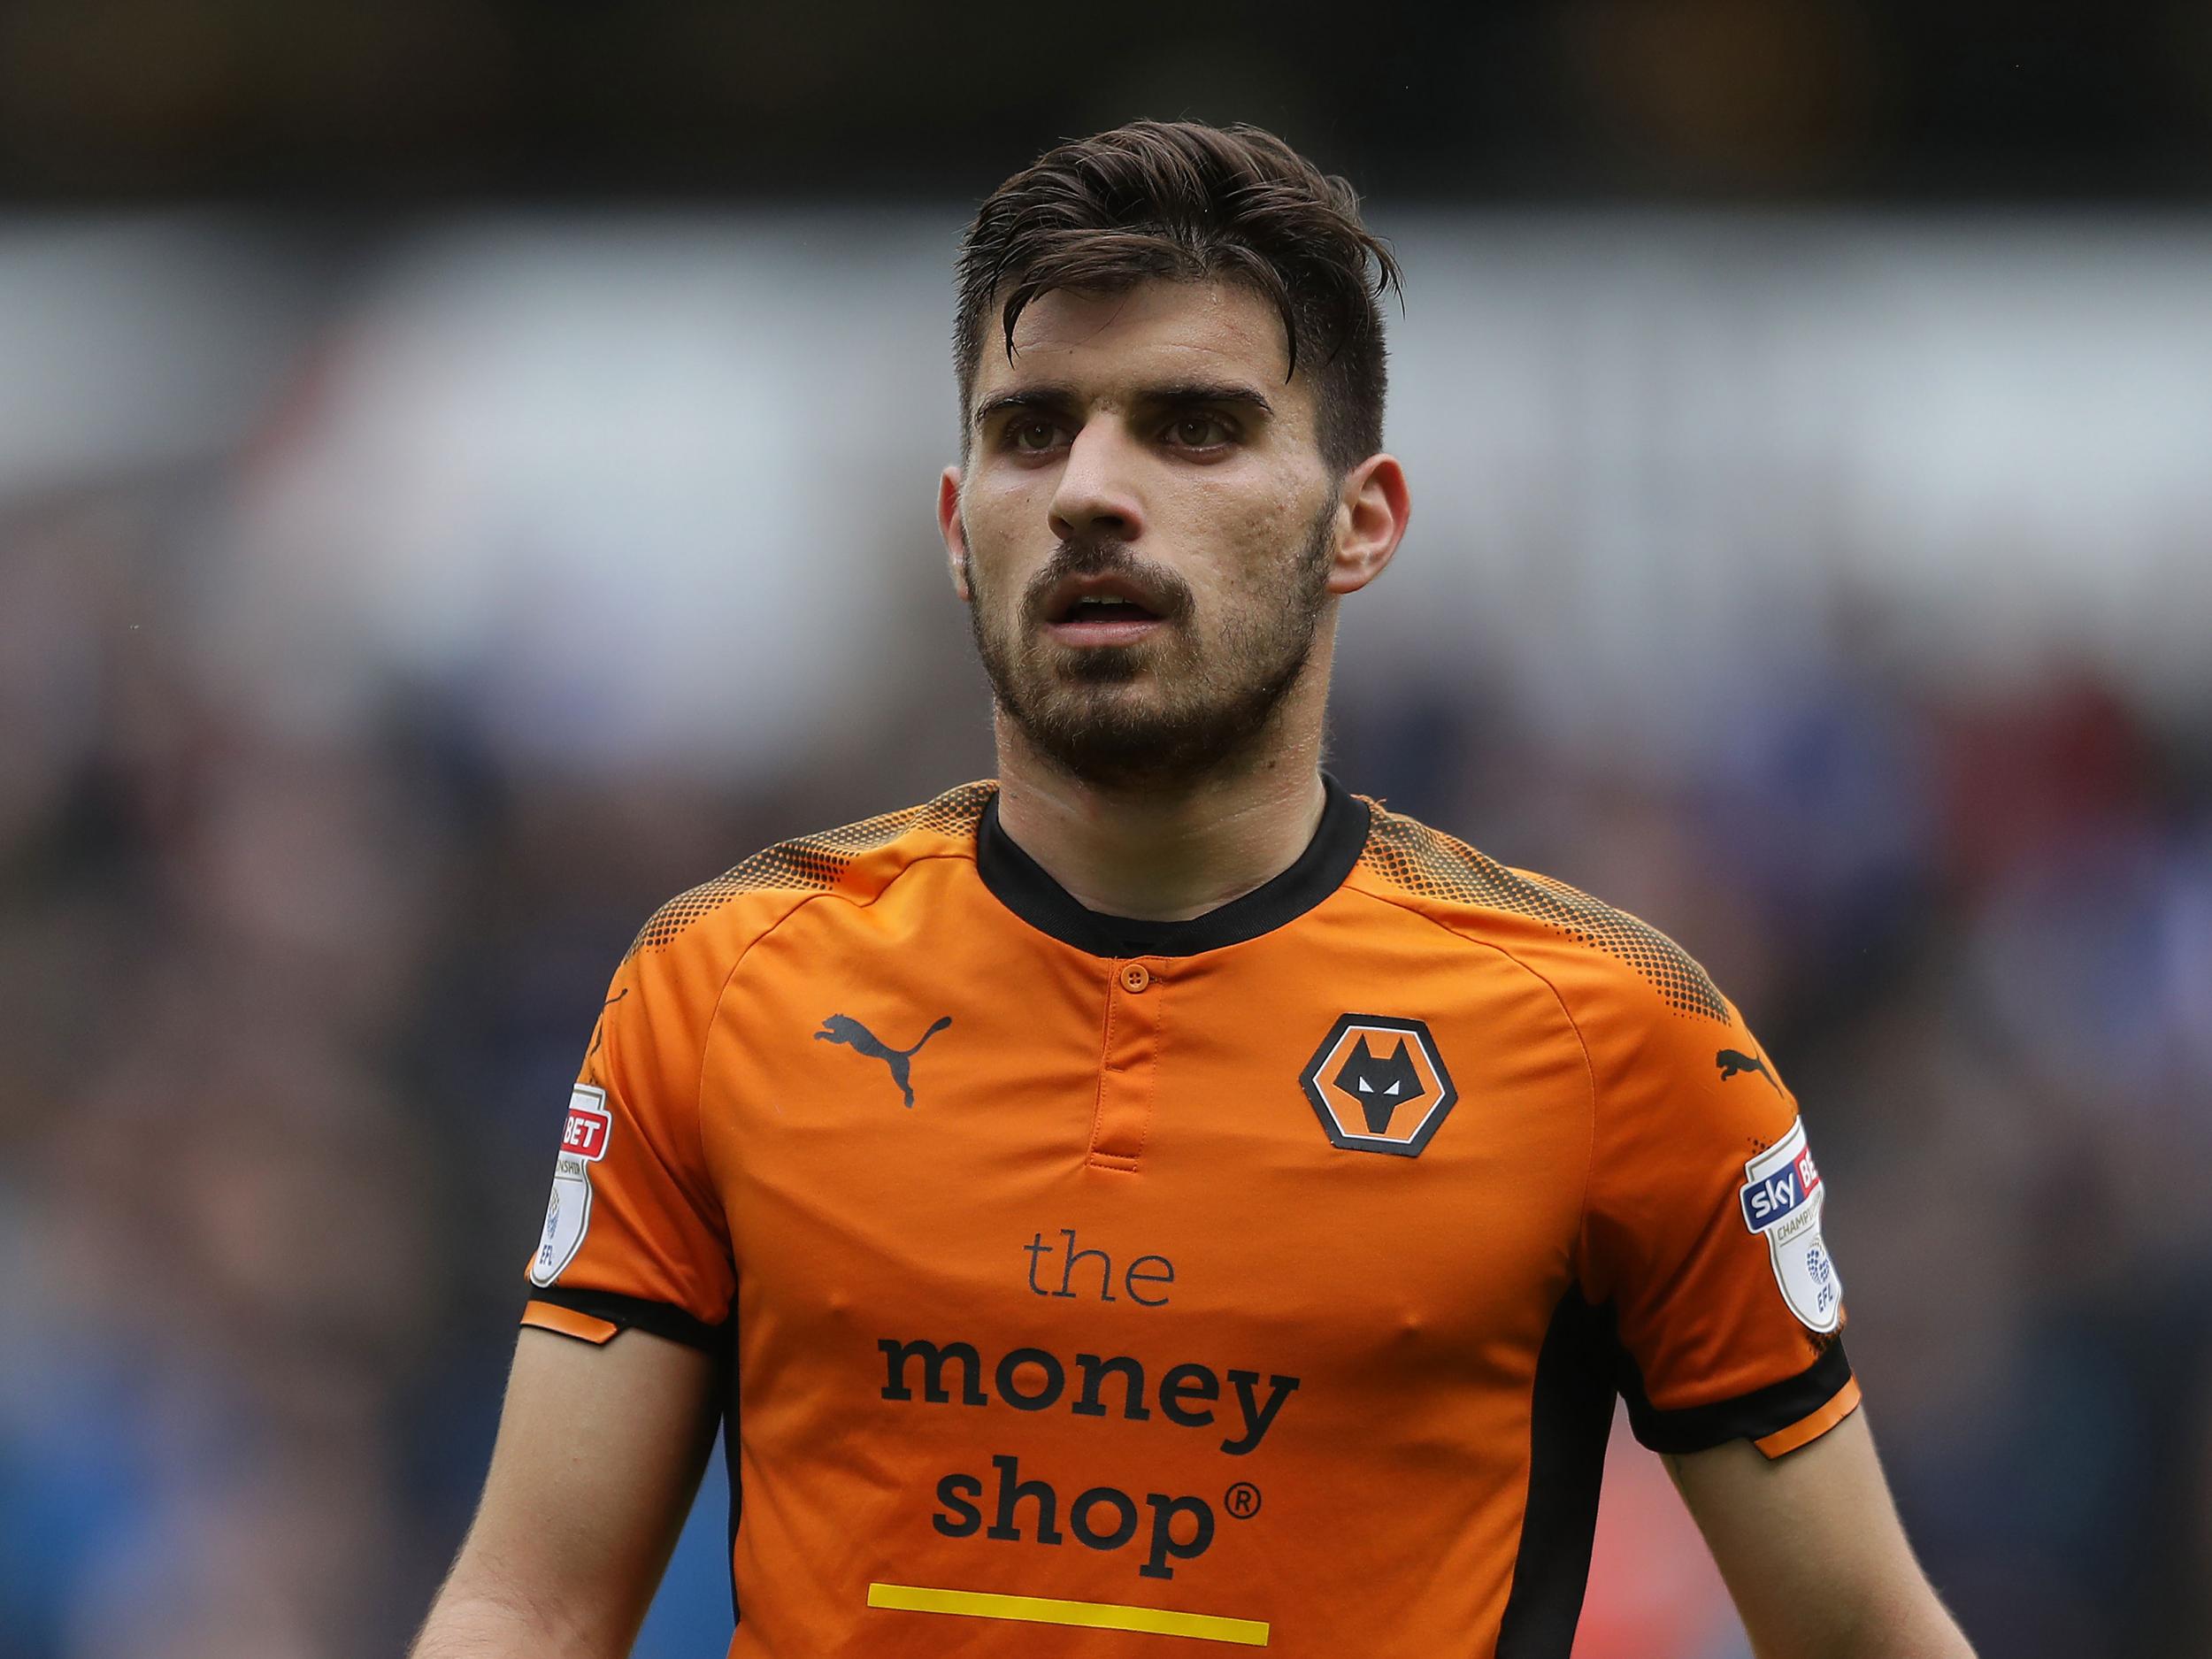 Wolverhampton Wanderers sign Ruben Neves to new five-year contract amid